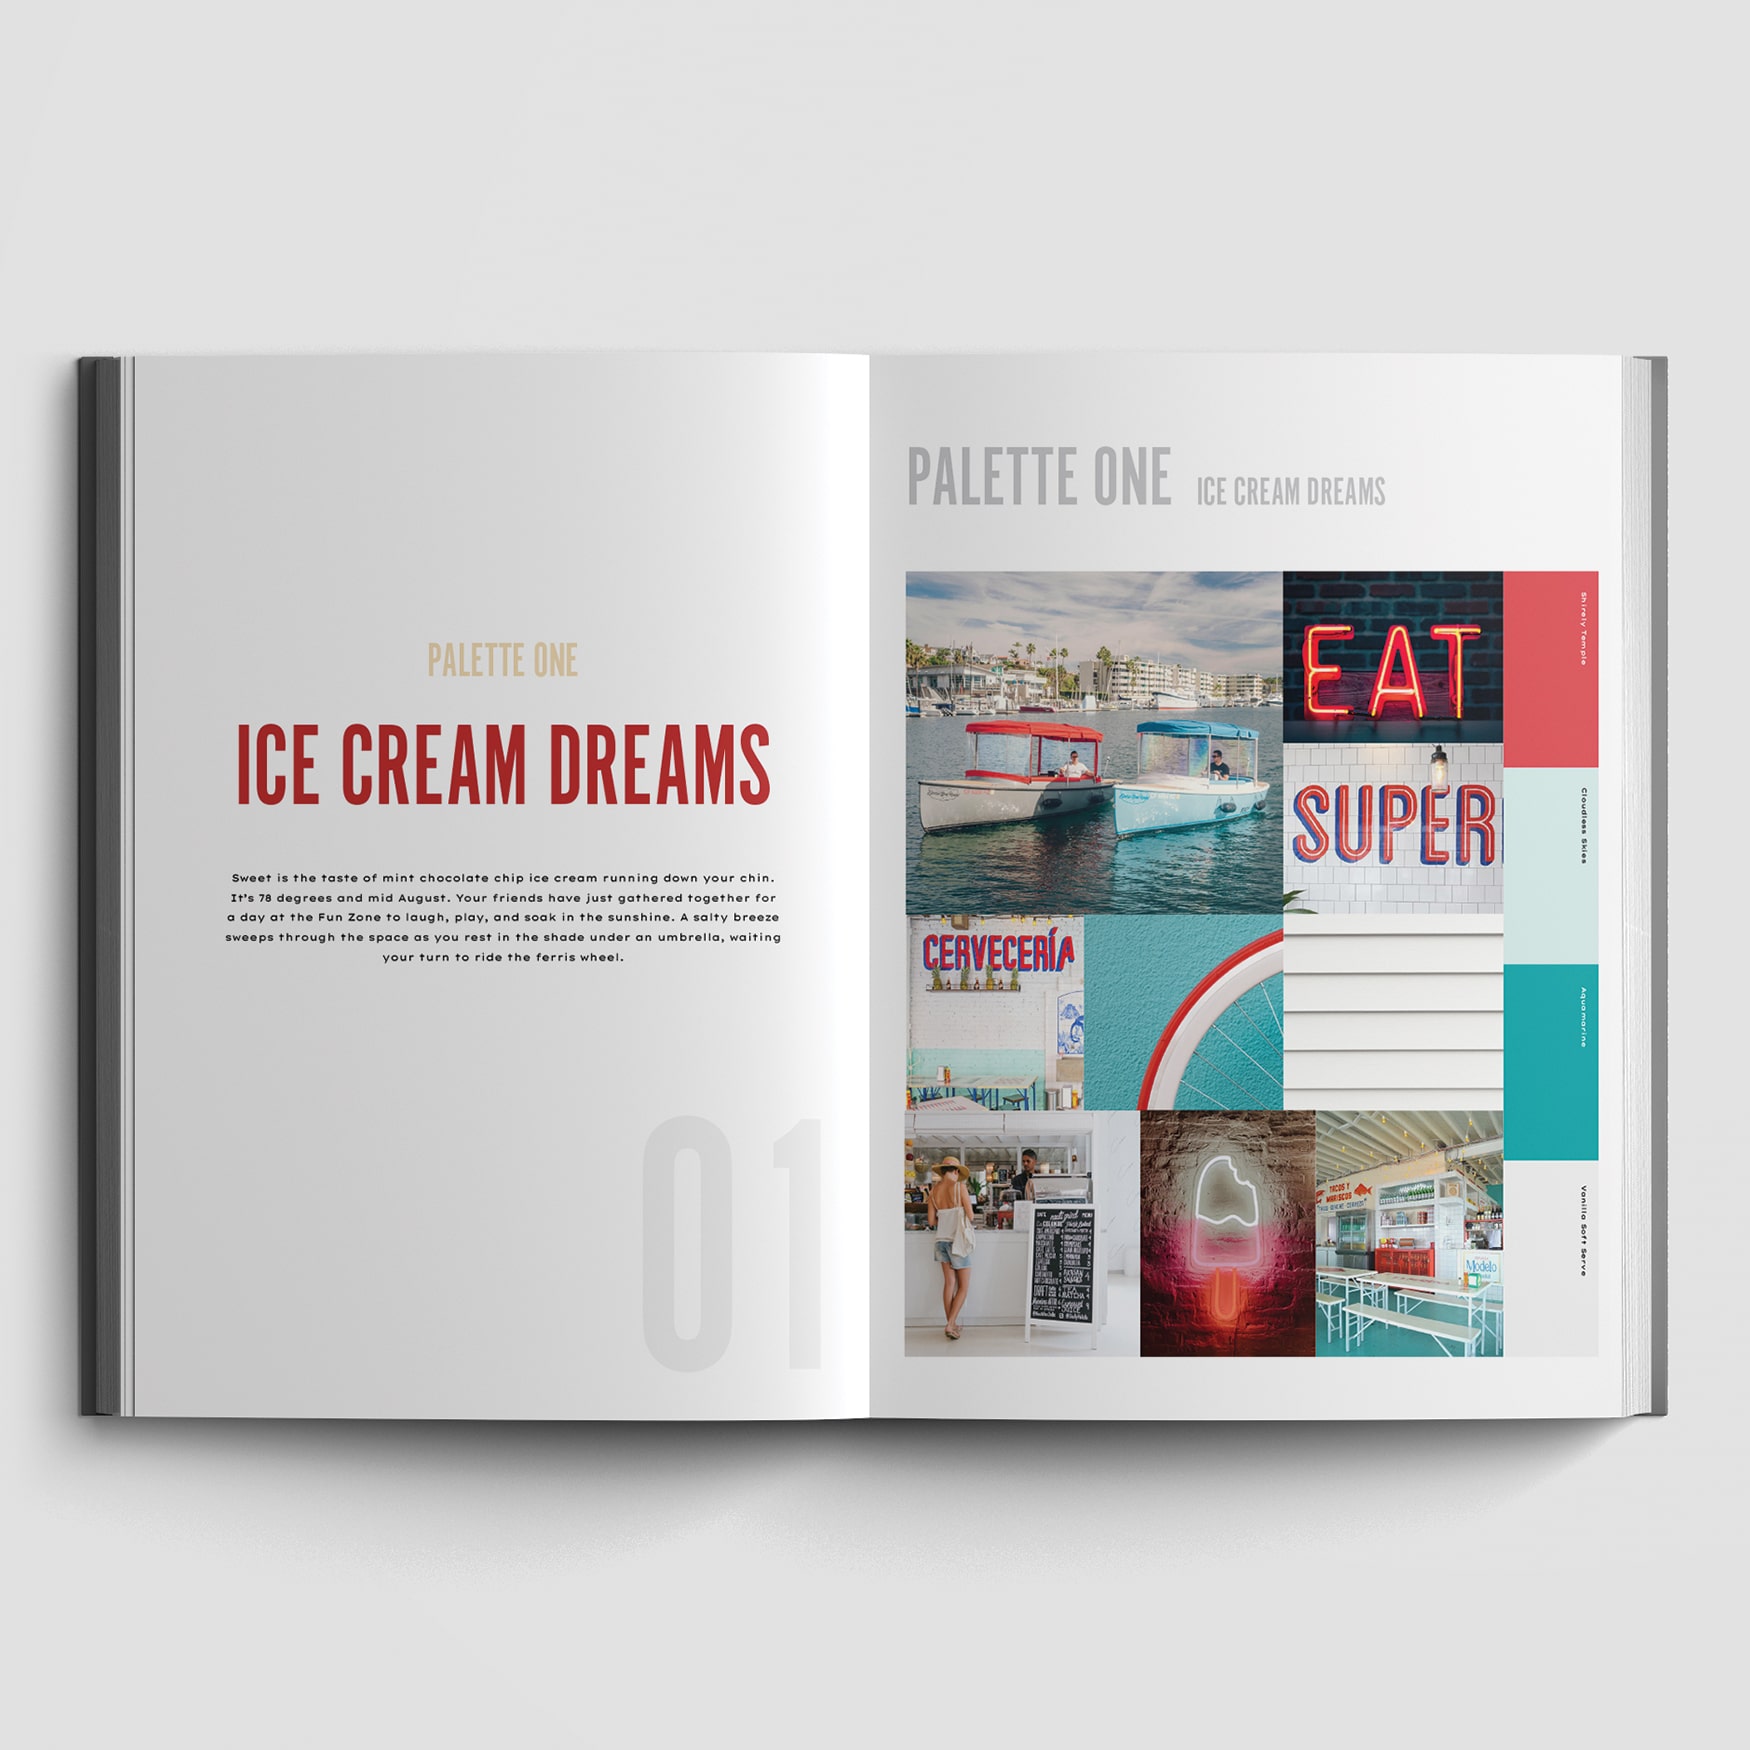 A book open to a spread of the "Ice Cream Dreams" color palette of the Balboa Fun Zone. The spread contains inspirational imagery of colors and typography that emulate the proposed palette for Balboa Fun Zone in Newport Beach, California.